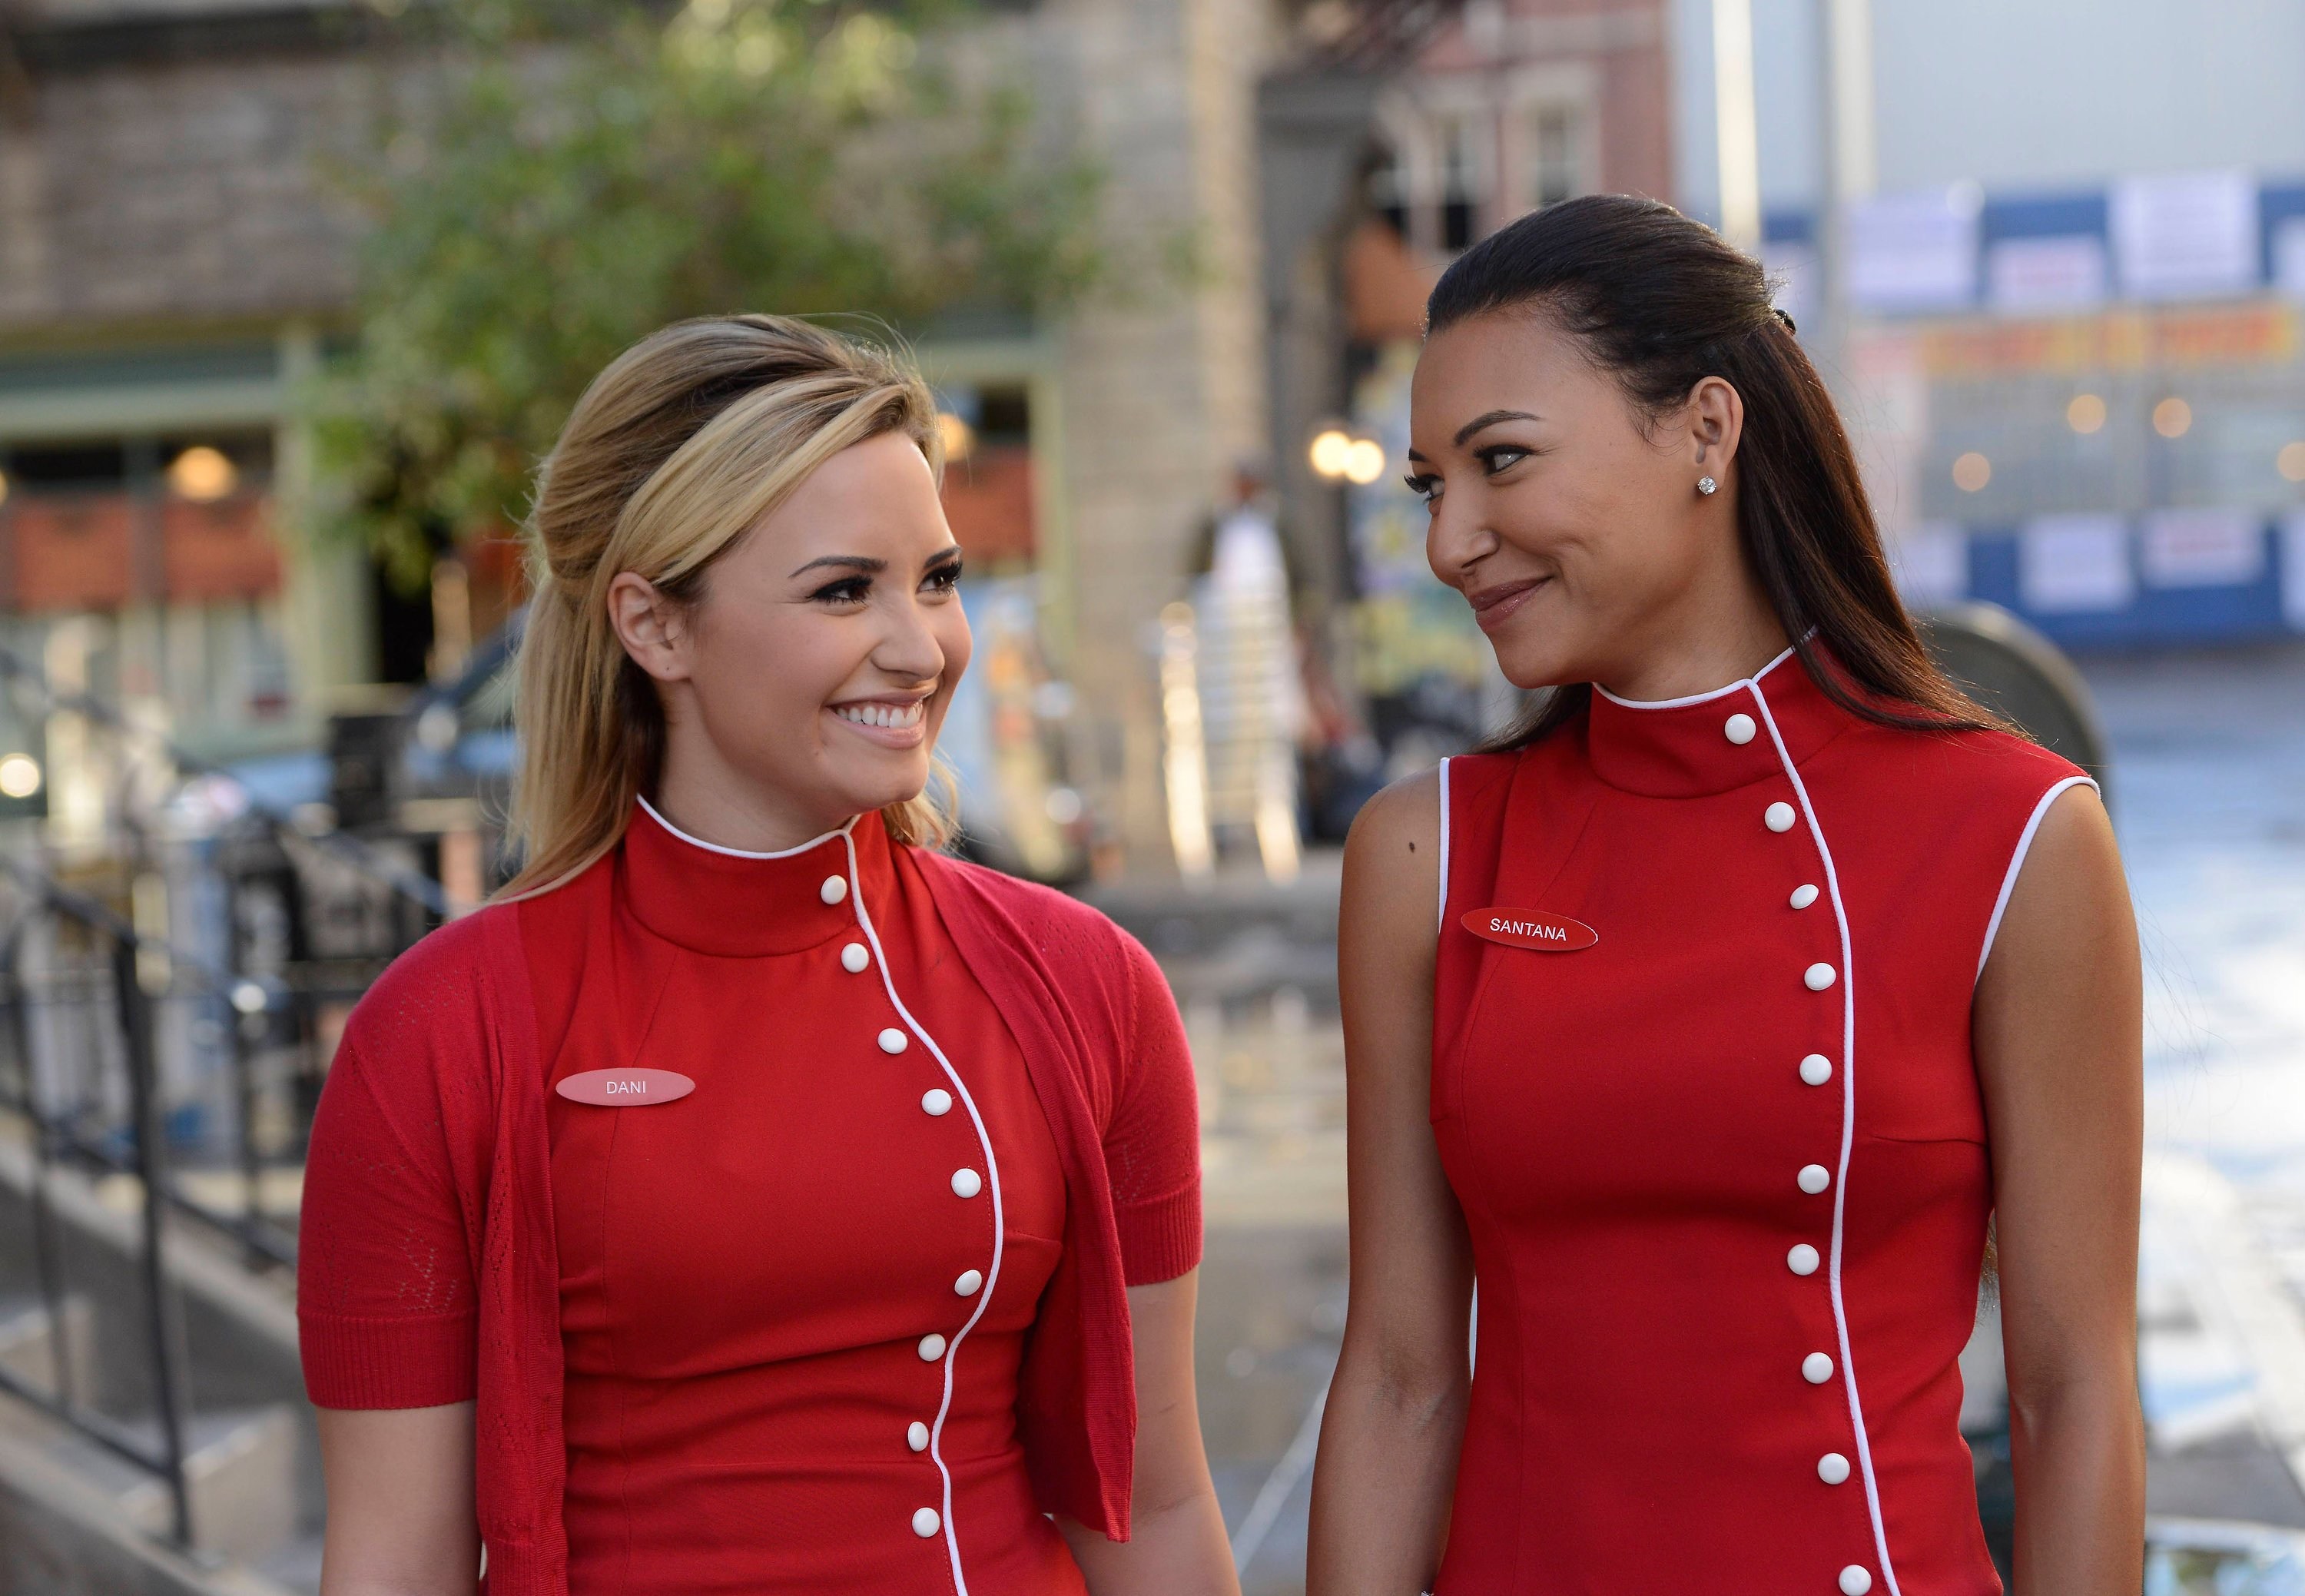 Who did Naya Rivera play in Glee and what were Santana’s best known songs in the show?